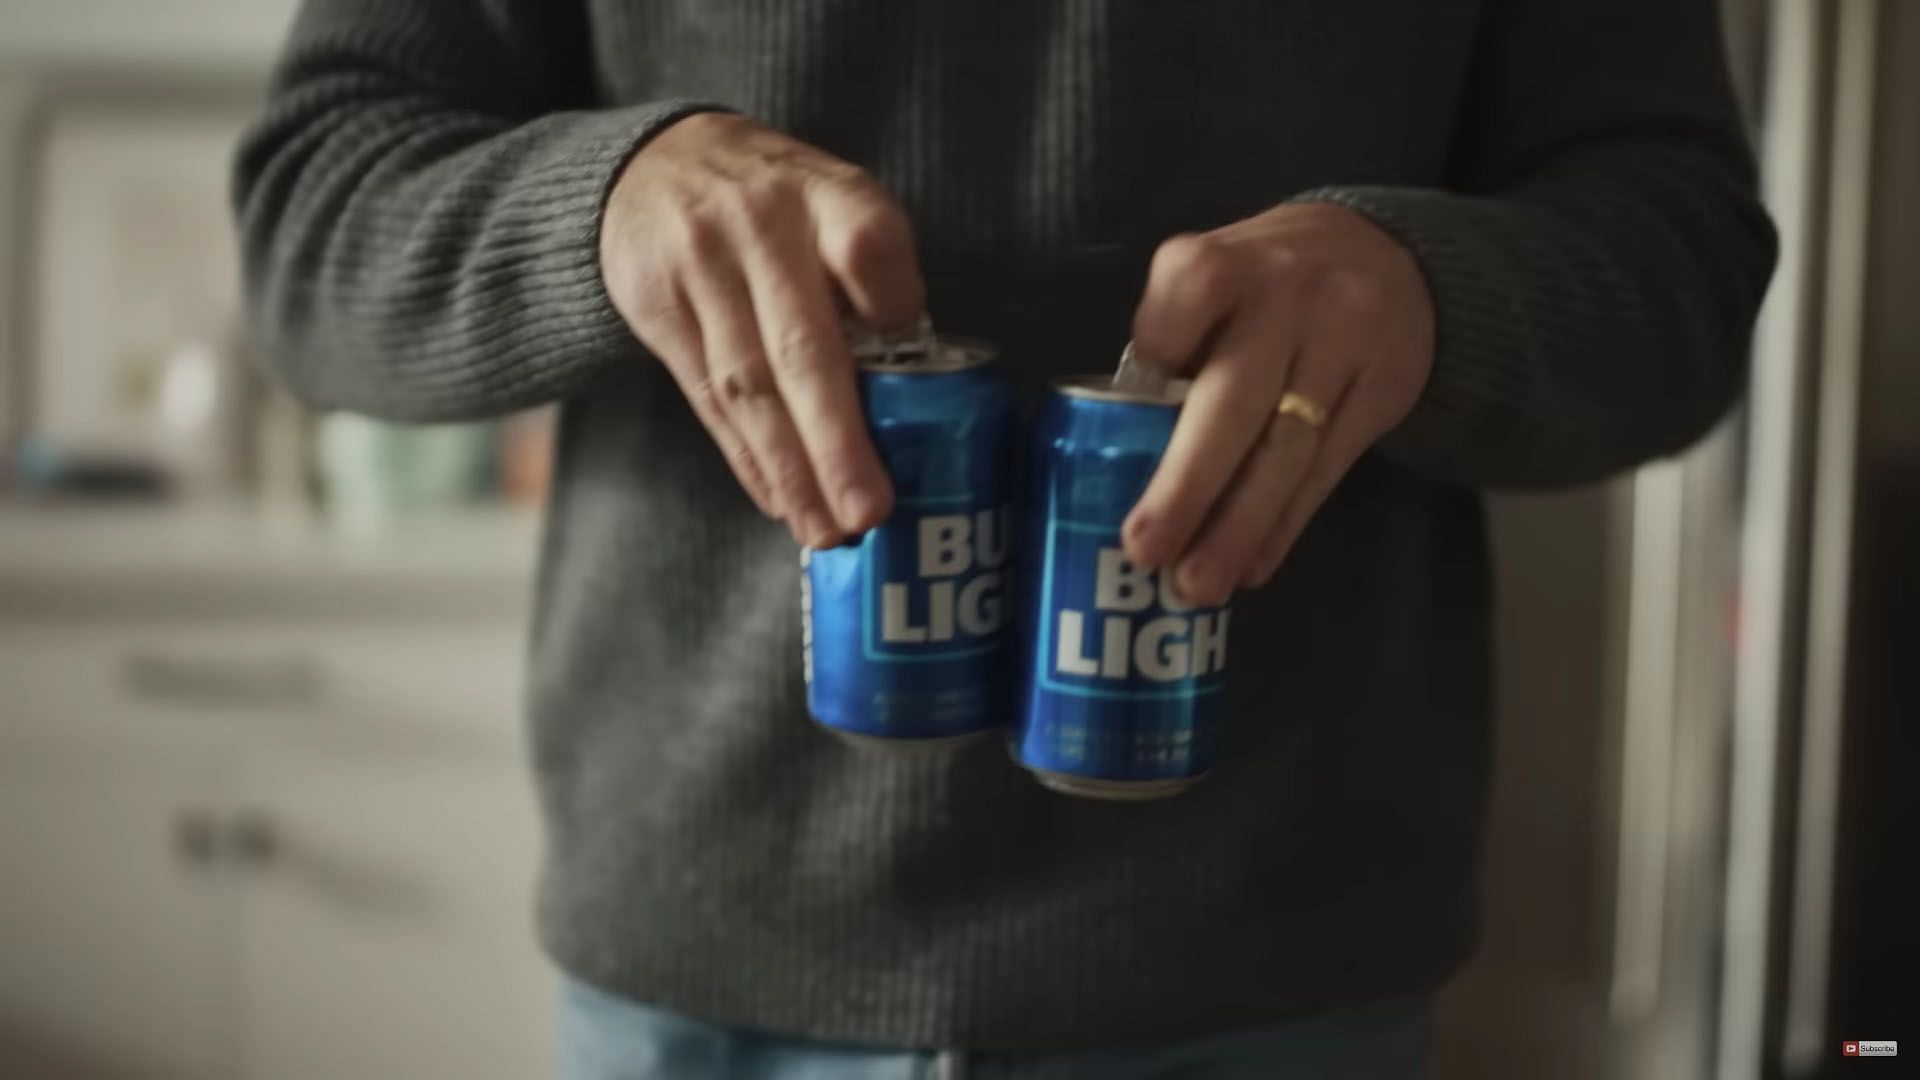 Second Anheuserr-Busch executive takes leave of absence (Image via YouTube/@BudLight)